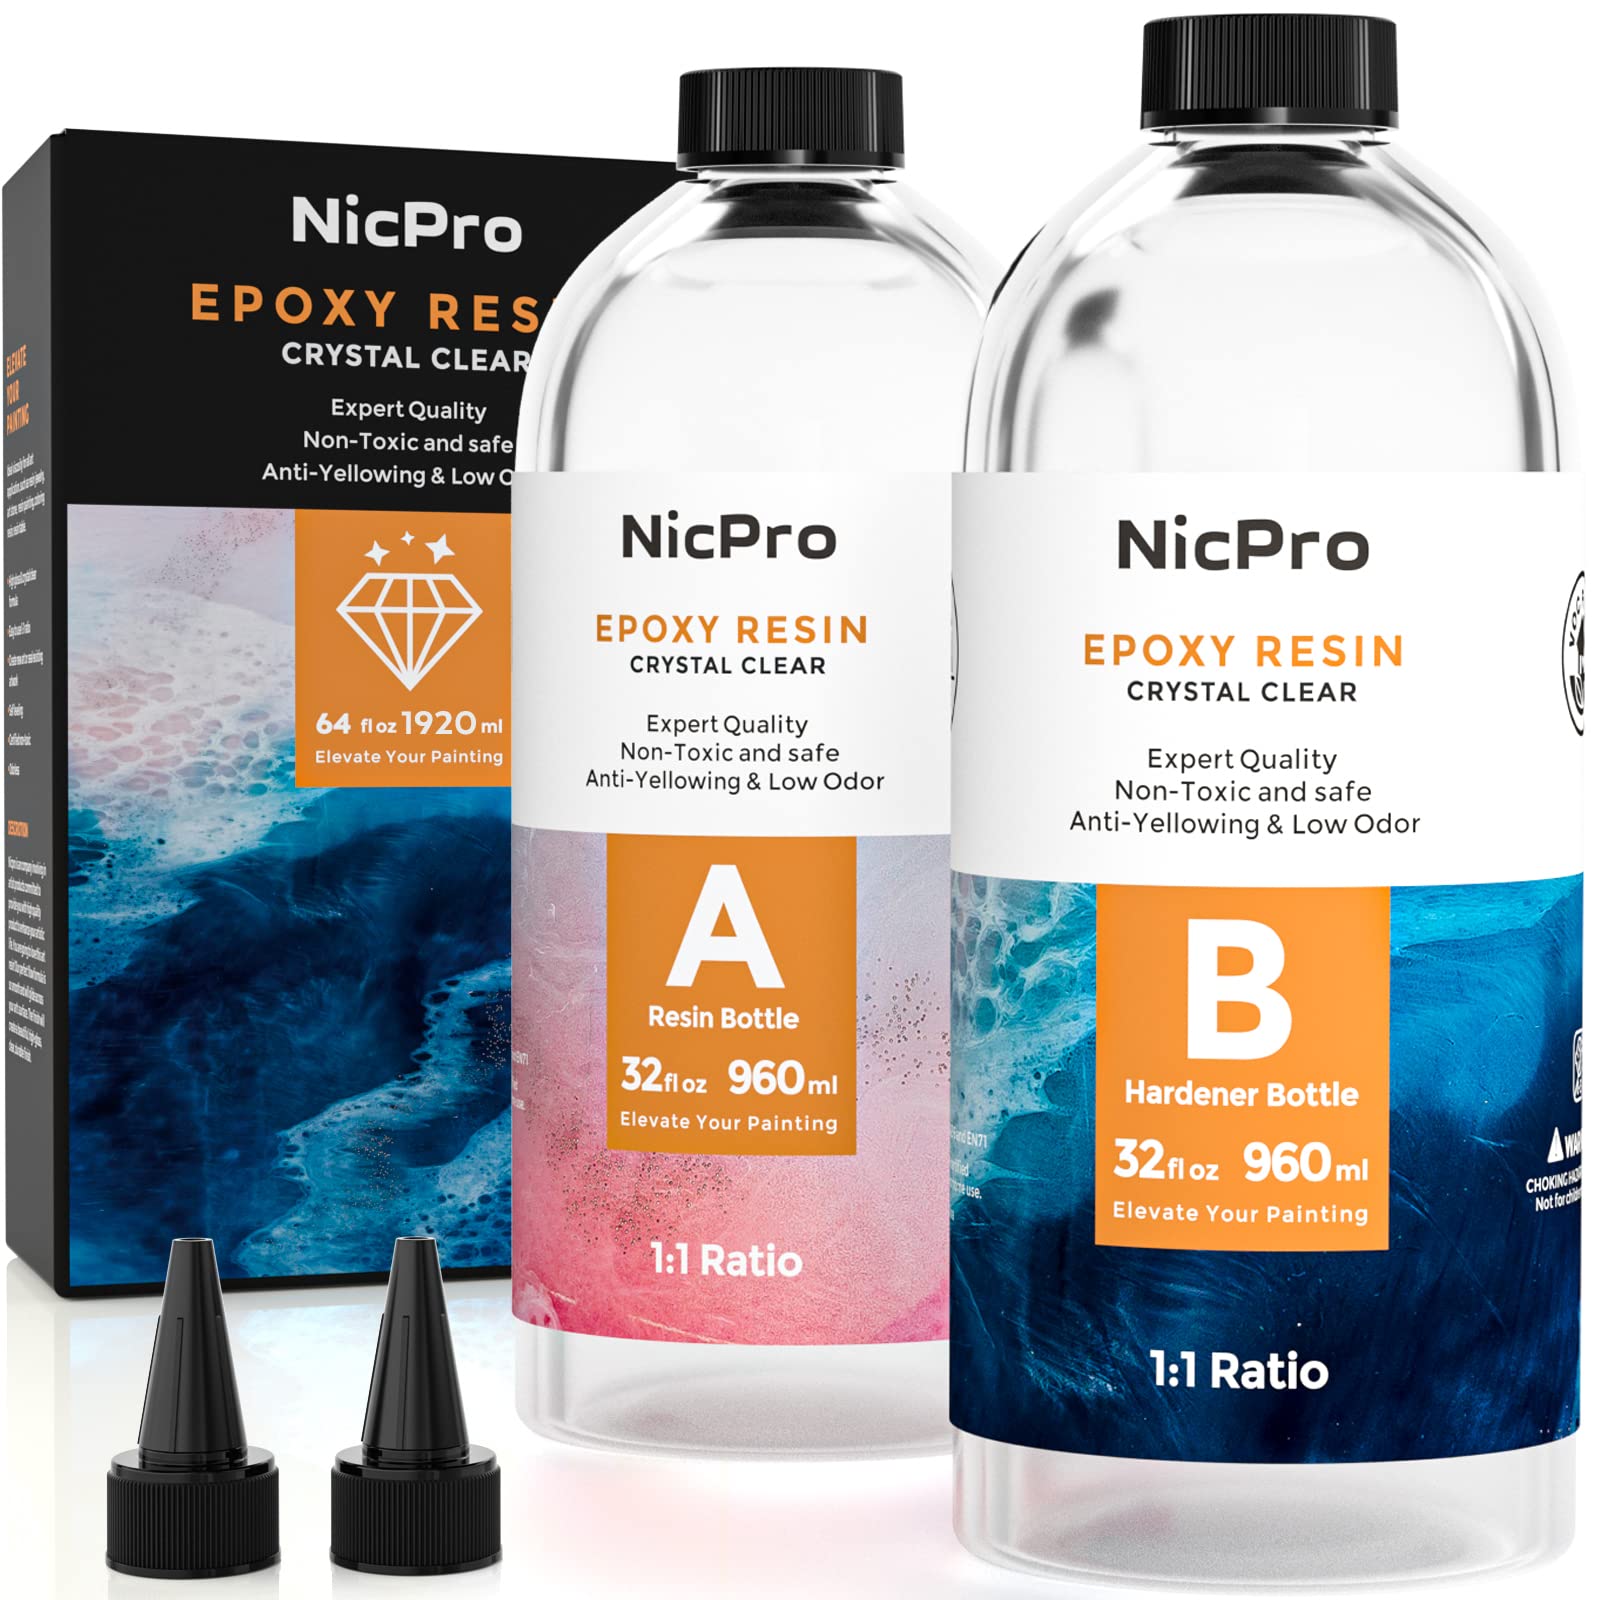 Nicpro 64 Ounce Crystal Clear Epoxy Resin Kit, Food Safe DIY Starter Epoxy  Resin for Craft, Canvas Painting, Molds Pigment Jewelry Making, Resin